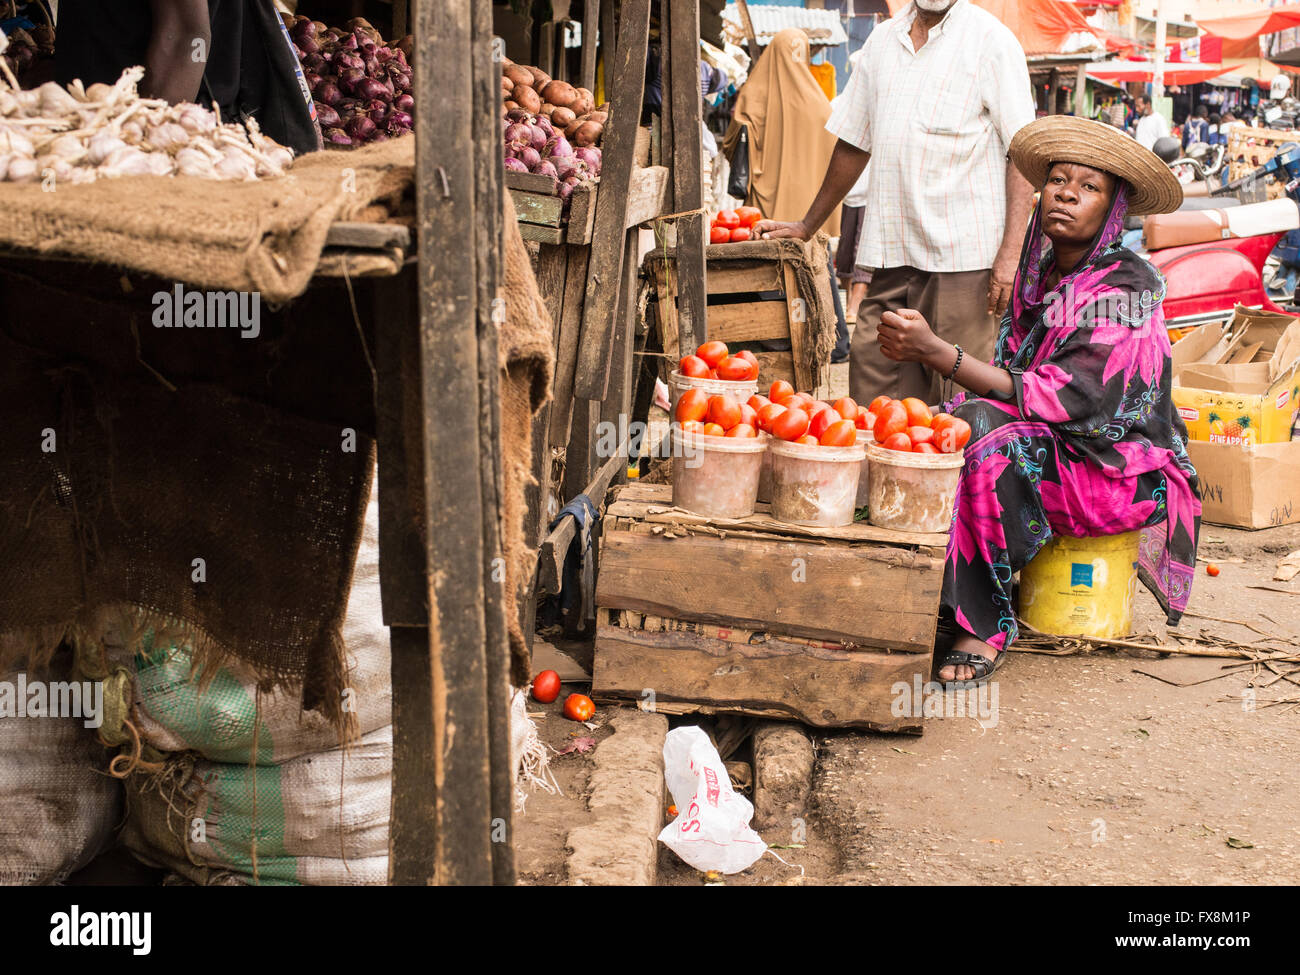 African woman wearing traditional clothes selling tomatoes in a local market. Stock Photo